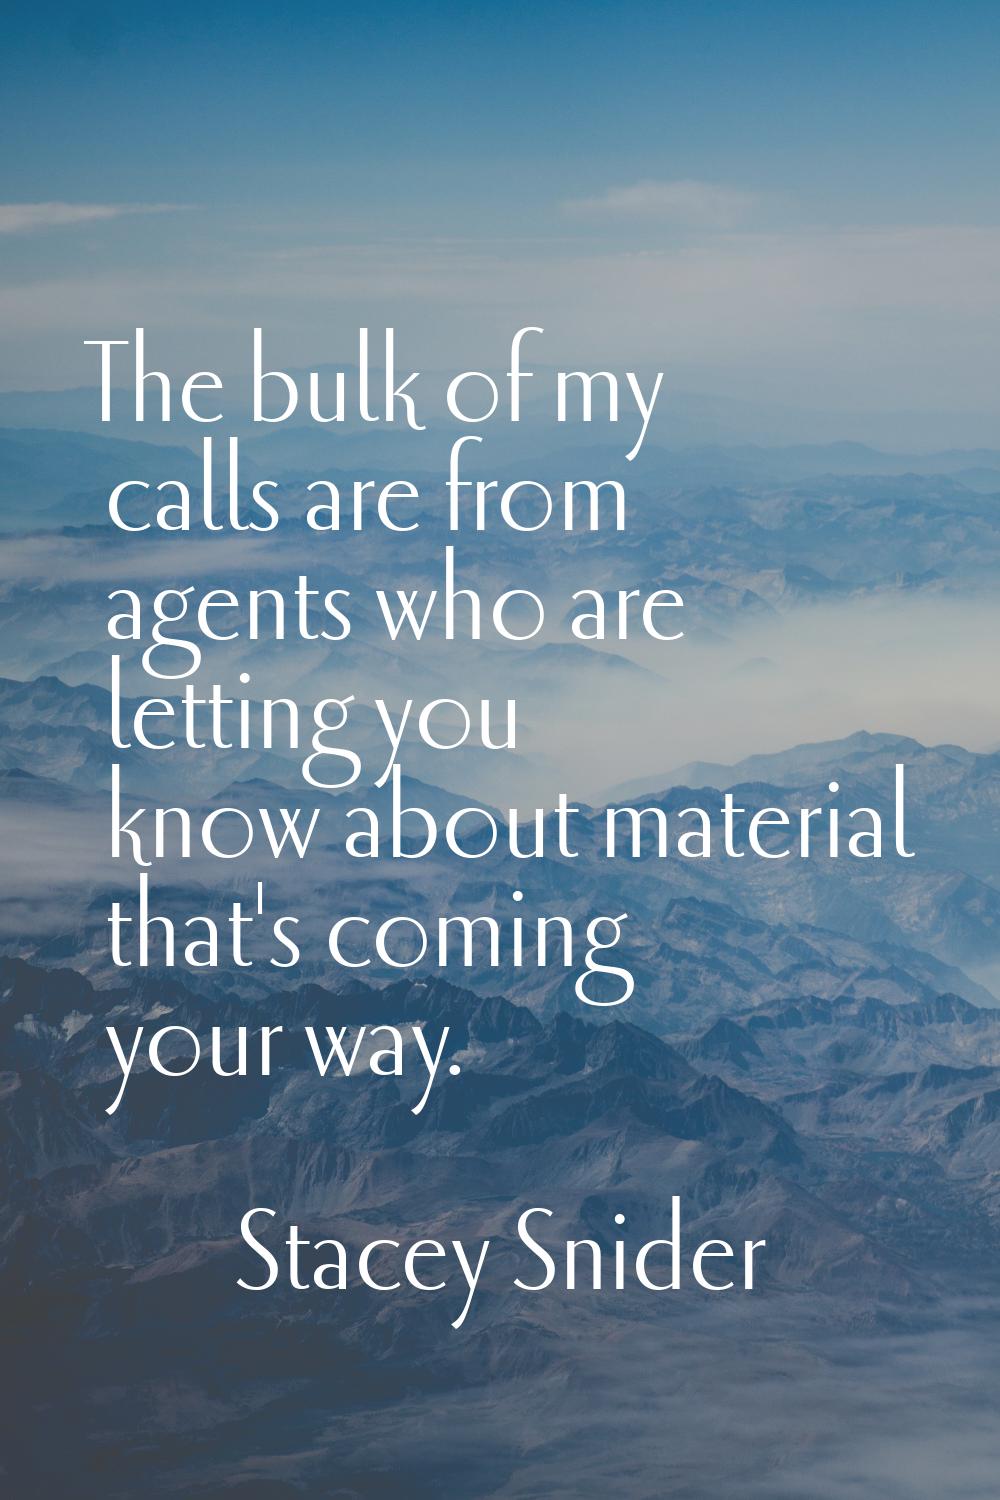 The bulk of my calls are from agents who are letting you know about material that's coming your way